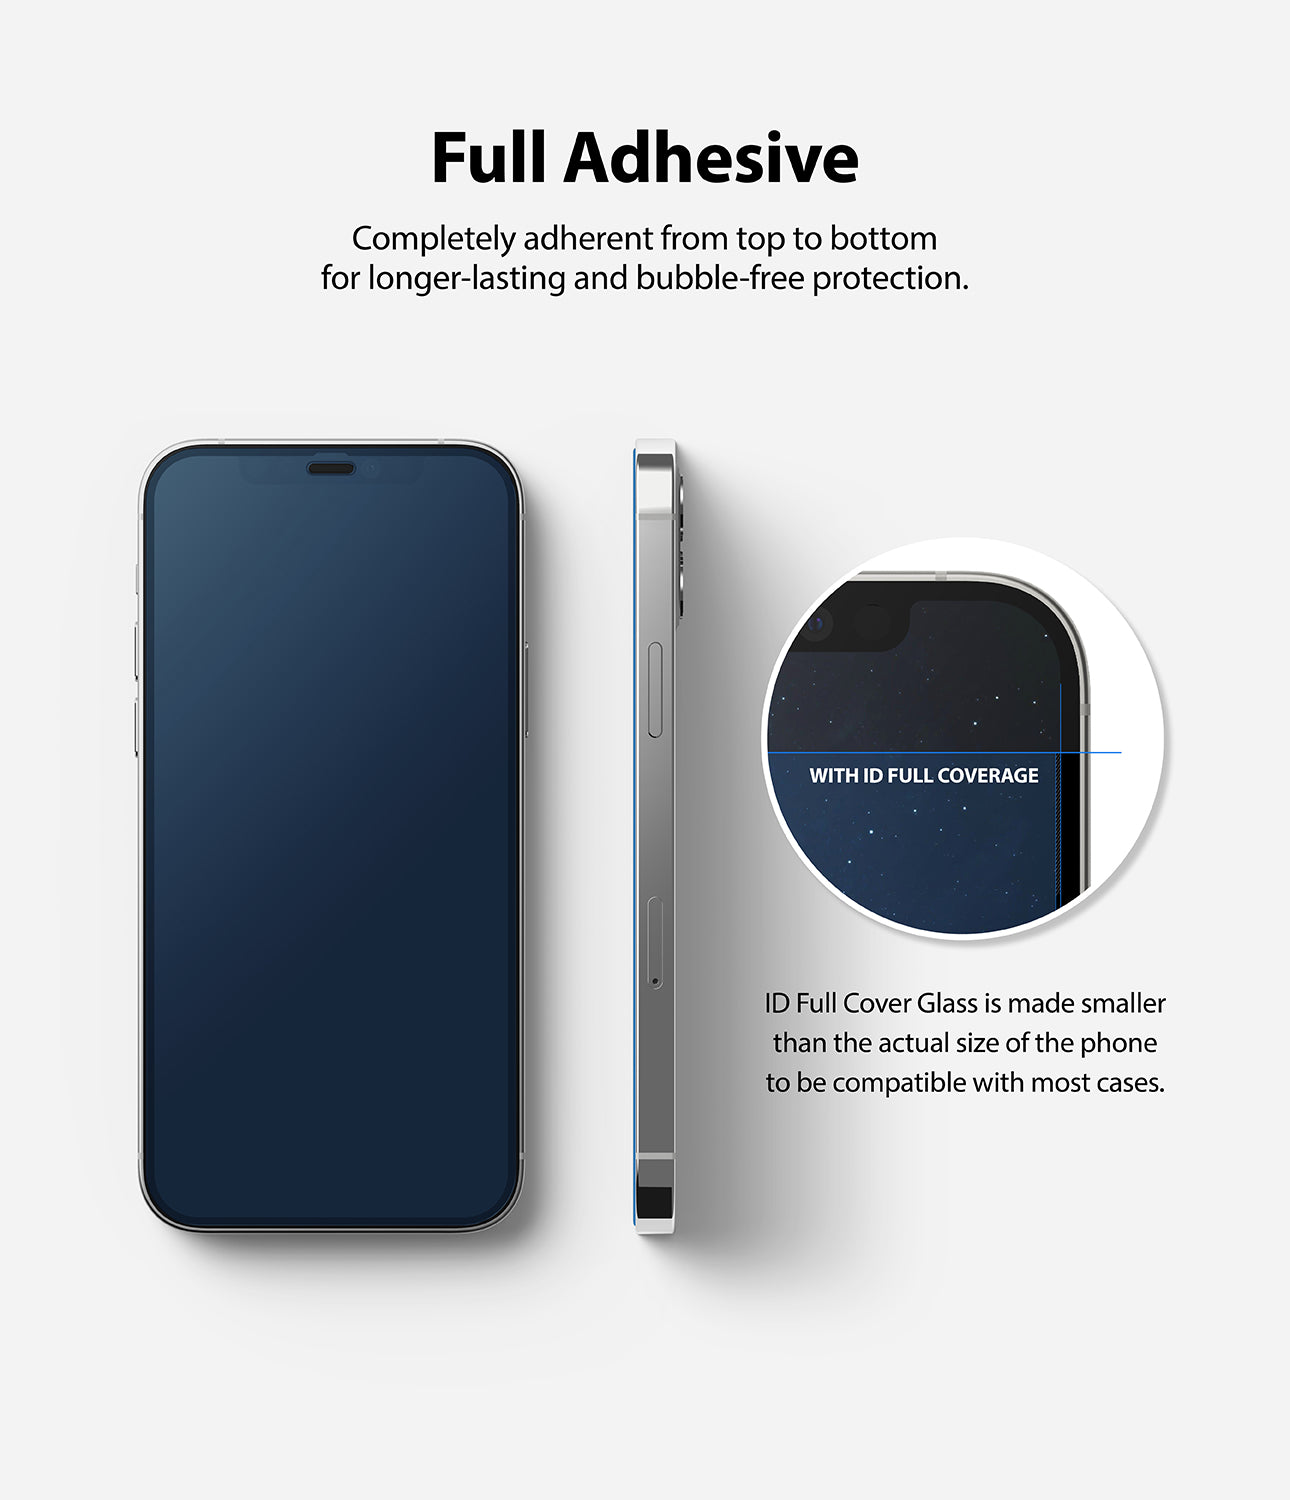 iPhone 12 Pro Max Screen Protector | Invisible Defender Glass - Full Adhesive